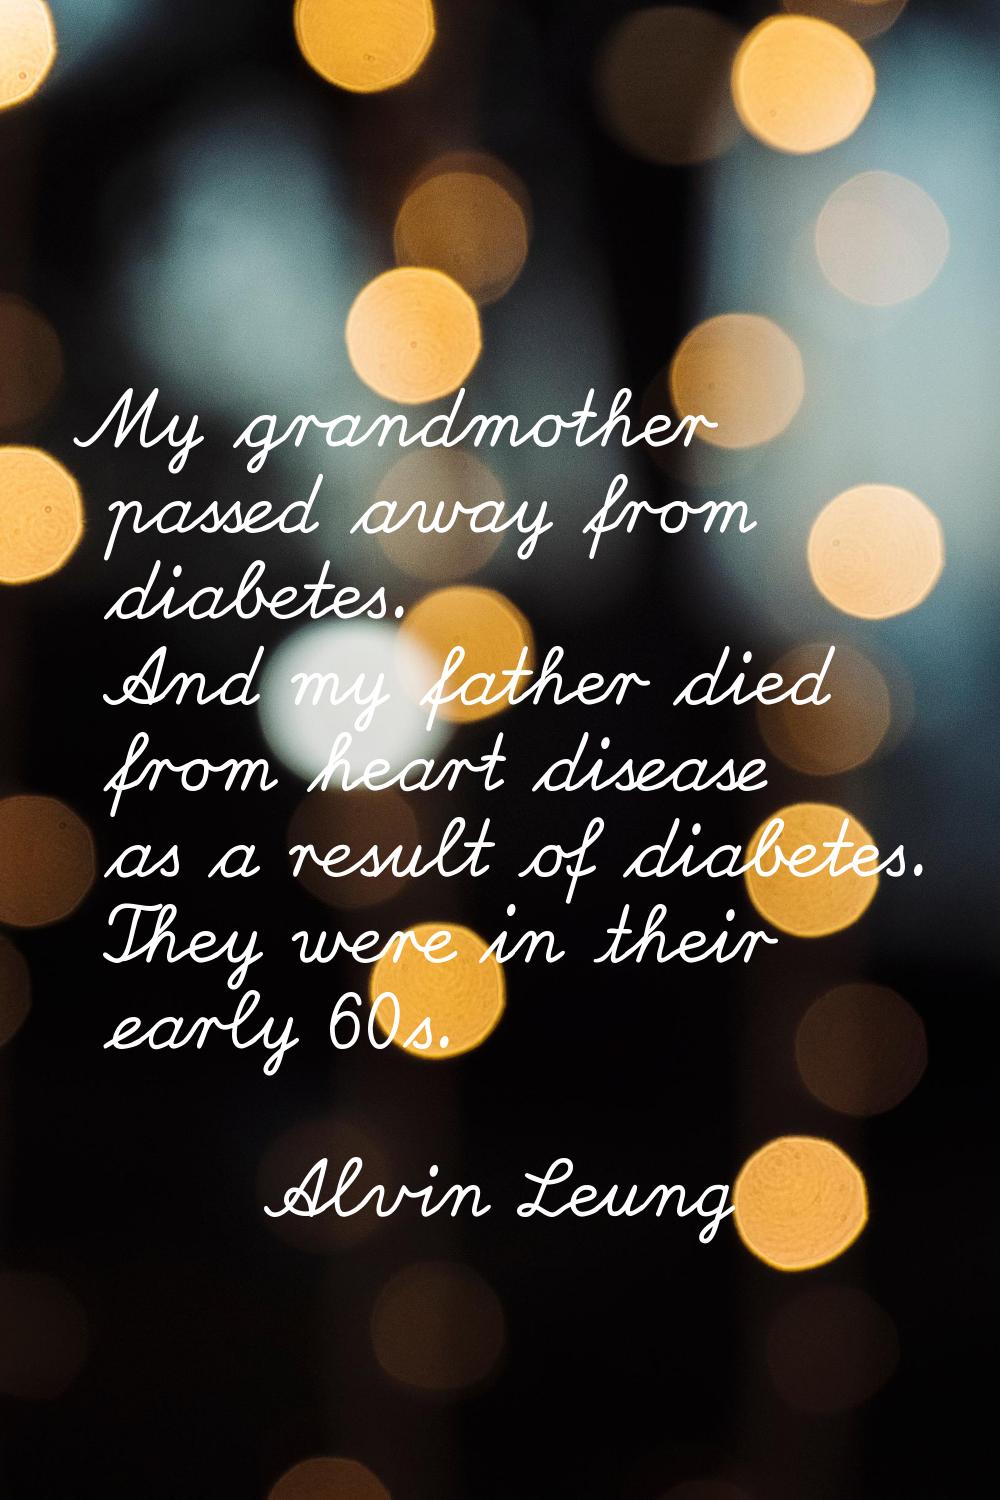 My grandmother passed away from diabetes. And my father died from heart disease as a result of diab